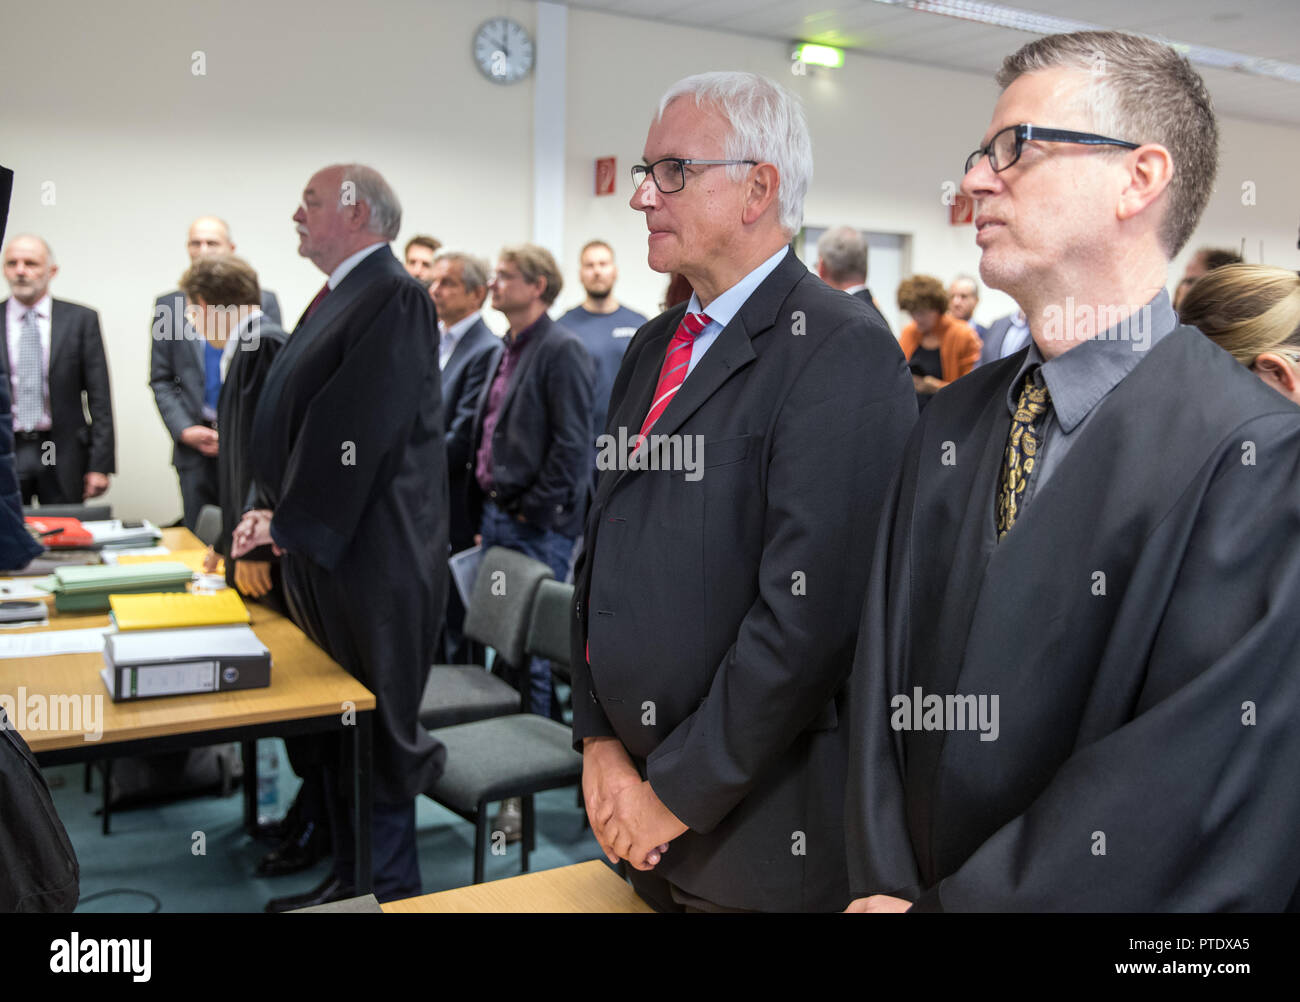 09 October 2018, Berlin: Jürgen Resch (M), the Federal Managing Director of Deutsche Umwelthilfe (DUH), is standing next to the lawyer Peter Kremer (r) at the beginning of the oral hearing on diesel driving bans. The court is negotiating possible diesel driving bans in the capital. On many streets in Berlin the limit value for harmful nitrogen dioxide is exceeded. Photo: Jens Büttner/dpa-Zentralbild/dpa Stock Photo